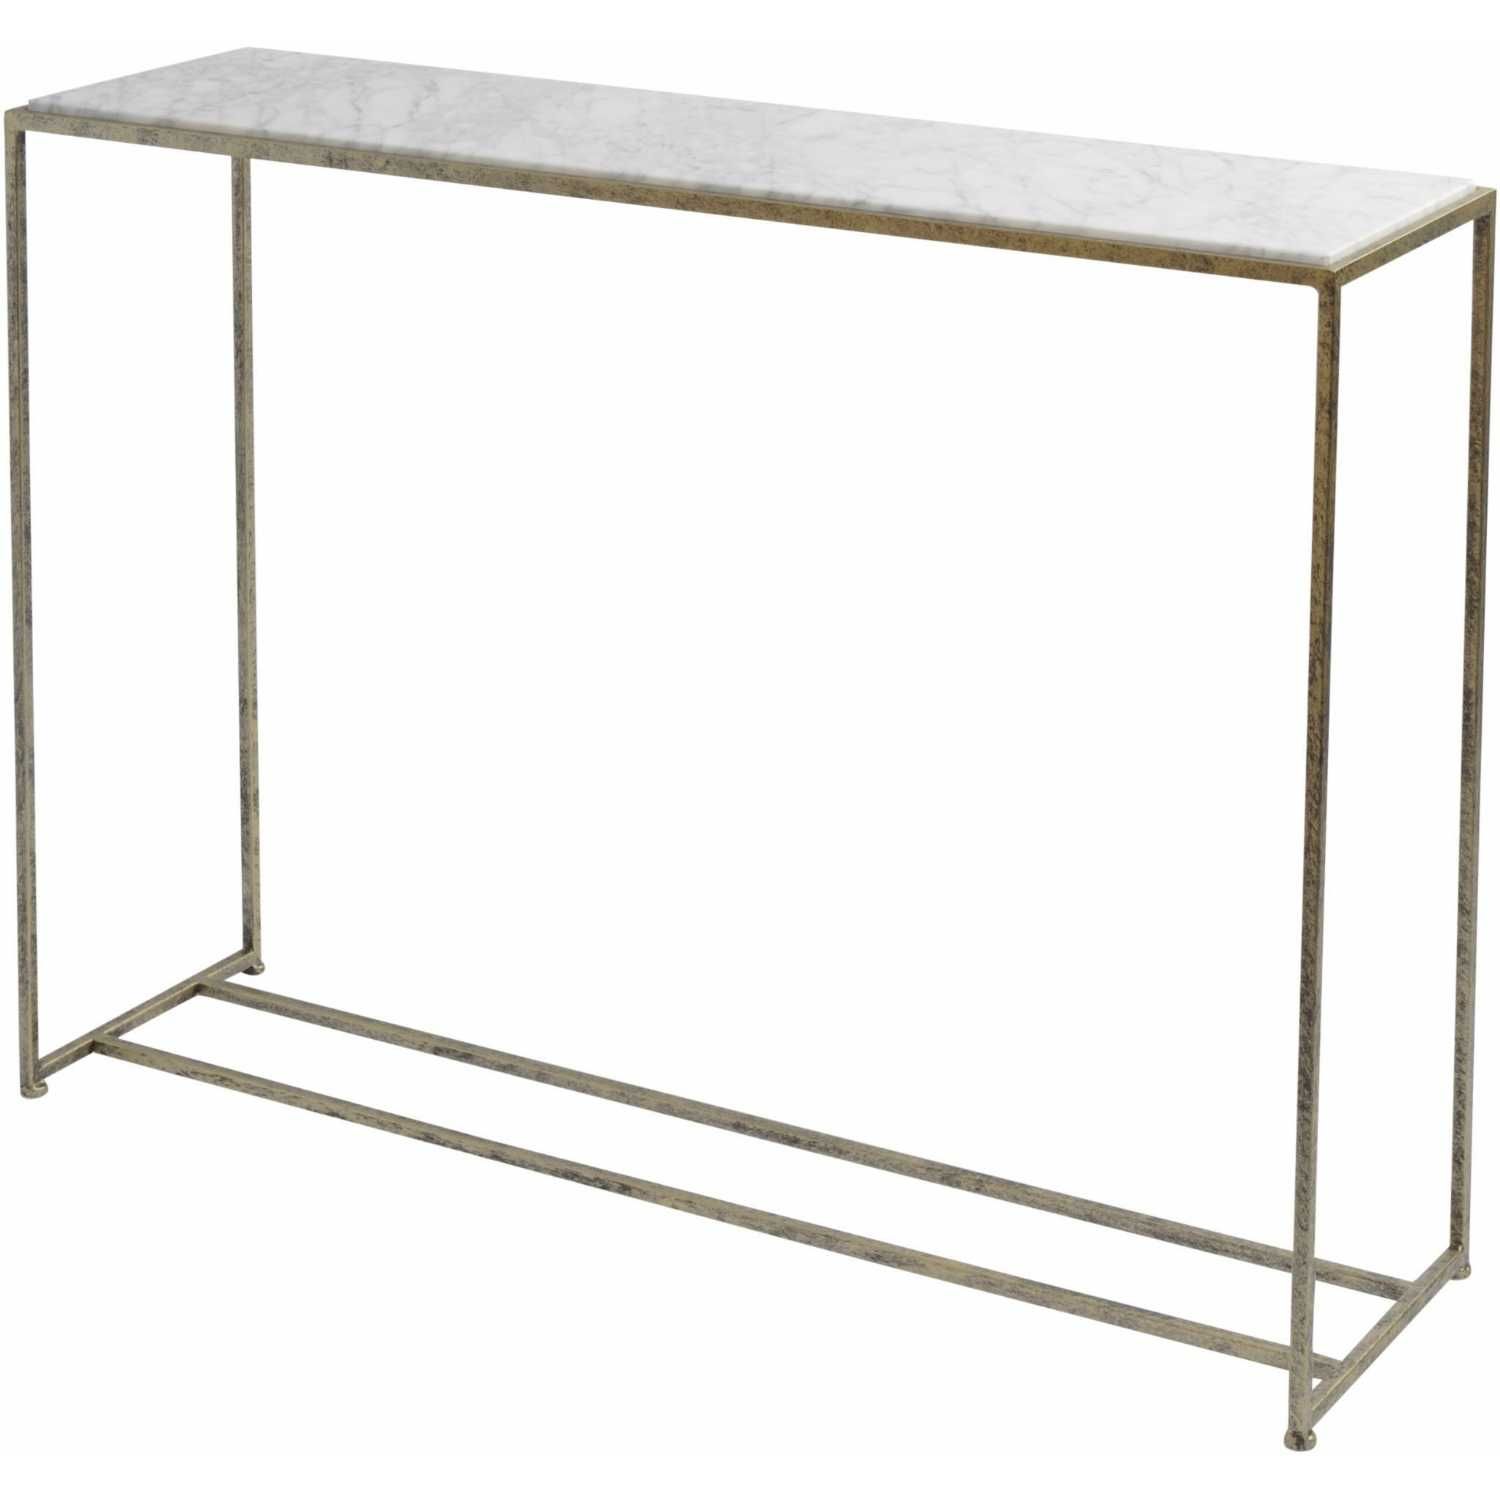 Mylas Console Table Antique Gold Finish Metal Frame White Marble Top Within Antique Gold Aluminum Console Tables (View 1 of 20)